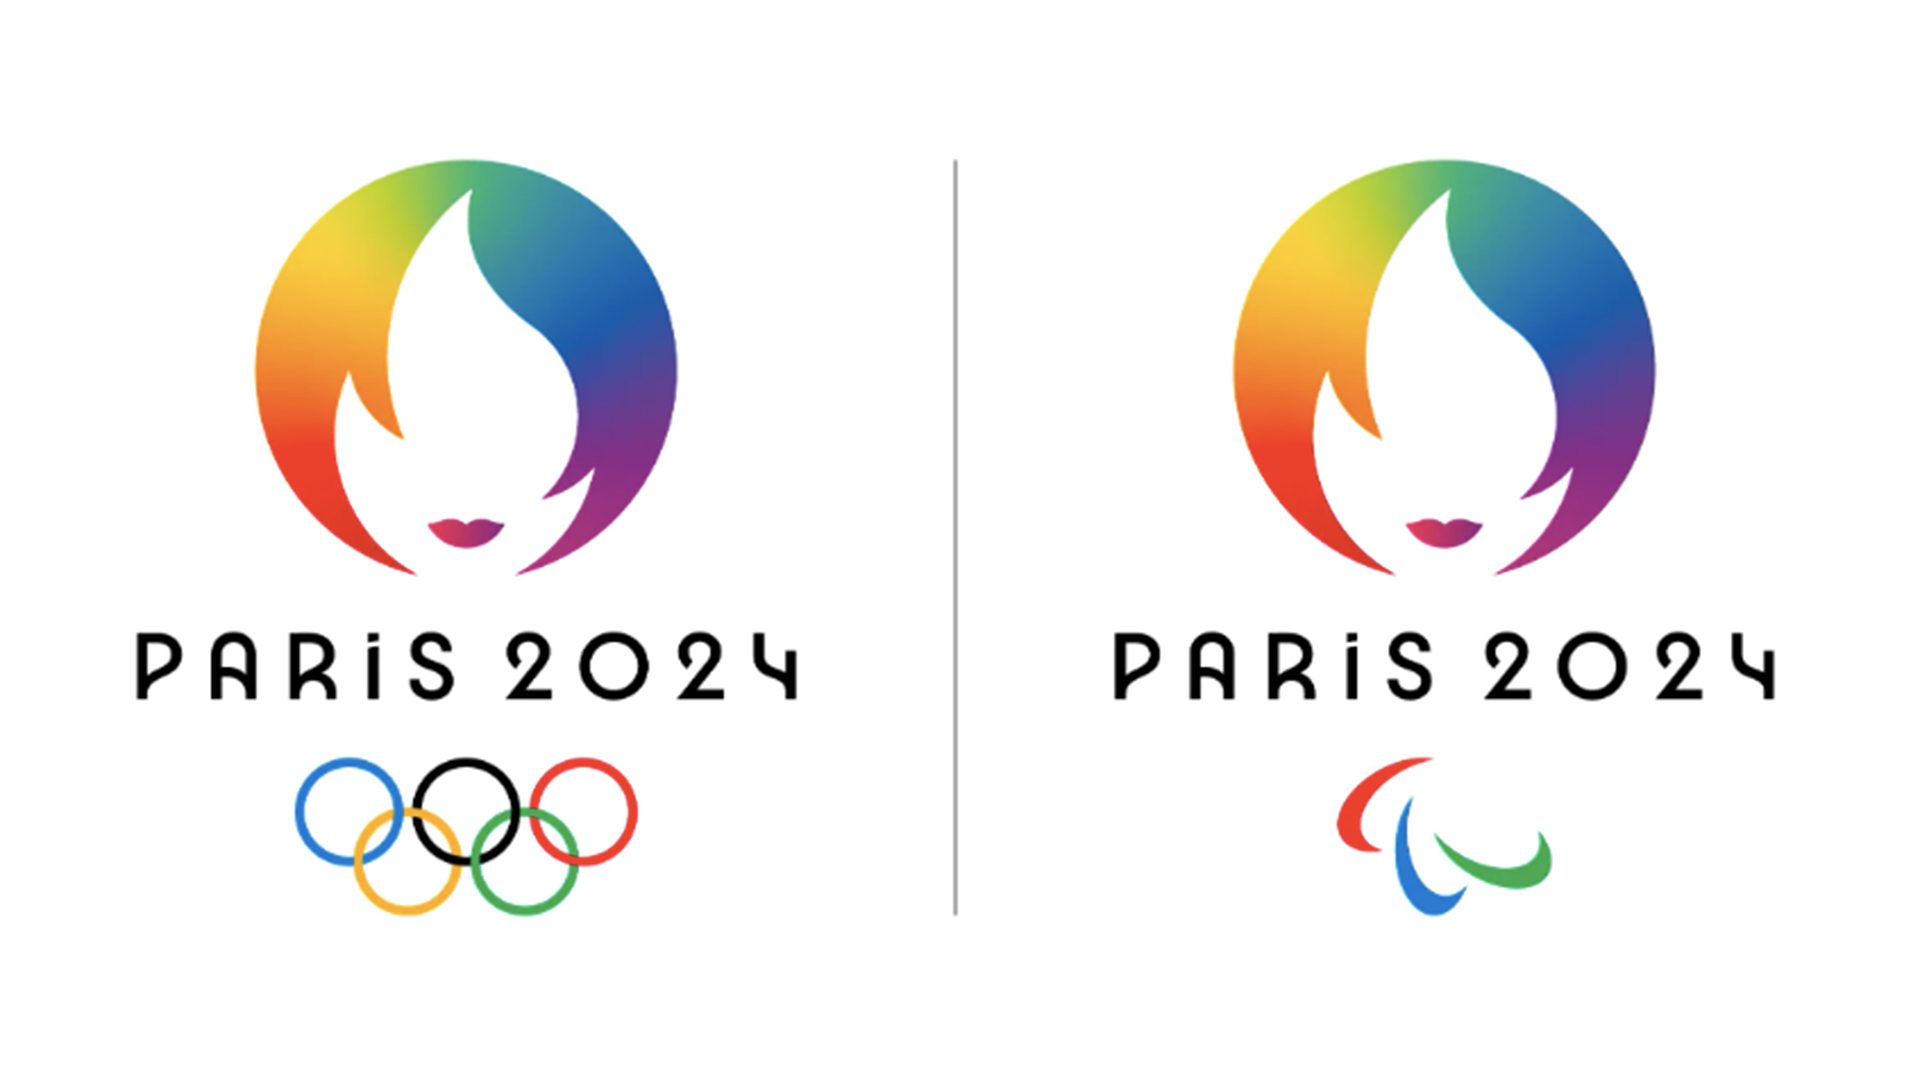 The emblems of the Olympic Games were dressed in the colors of pride.